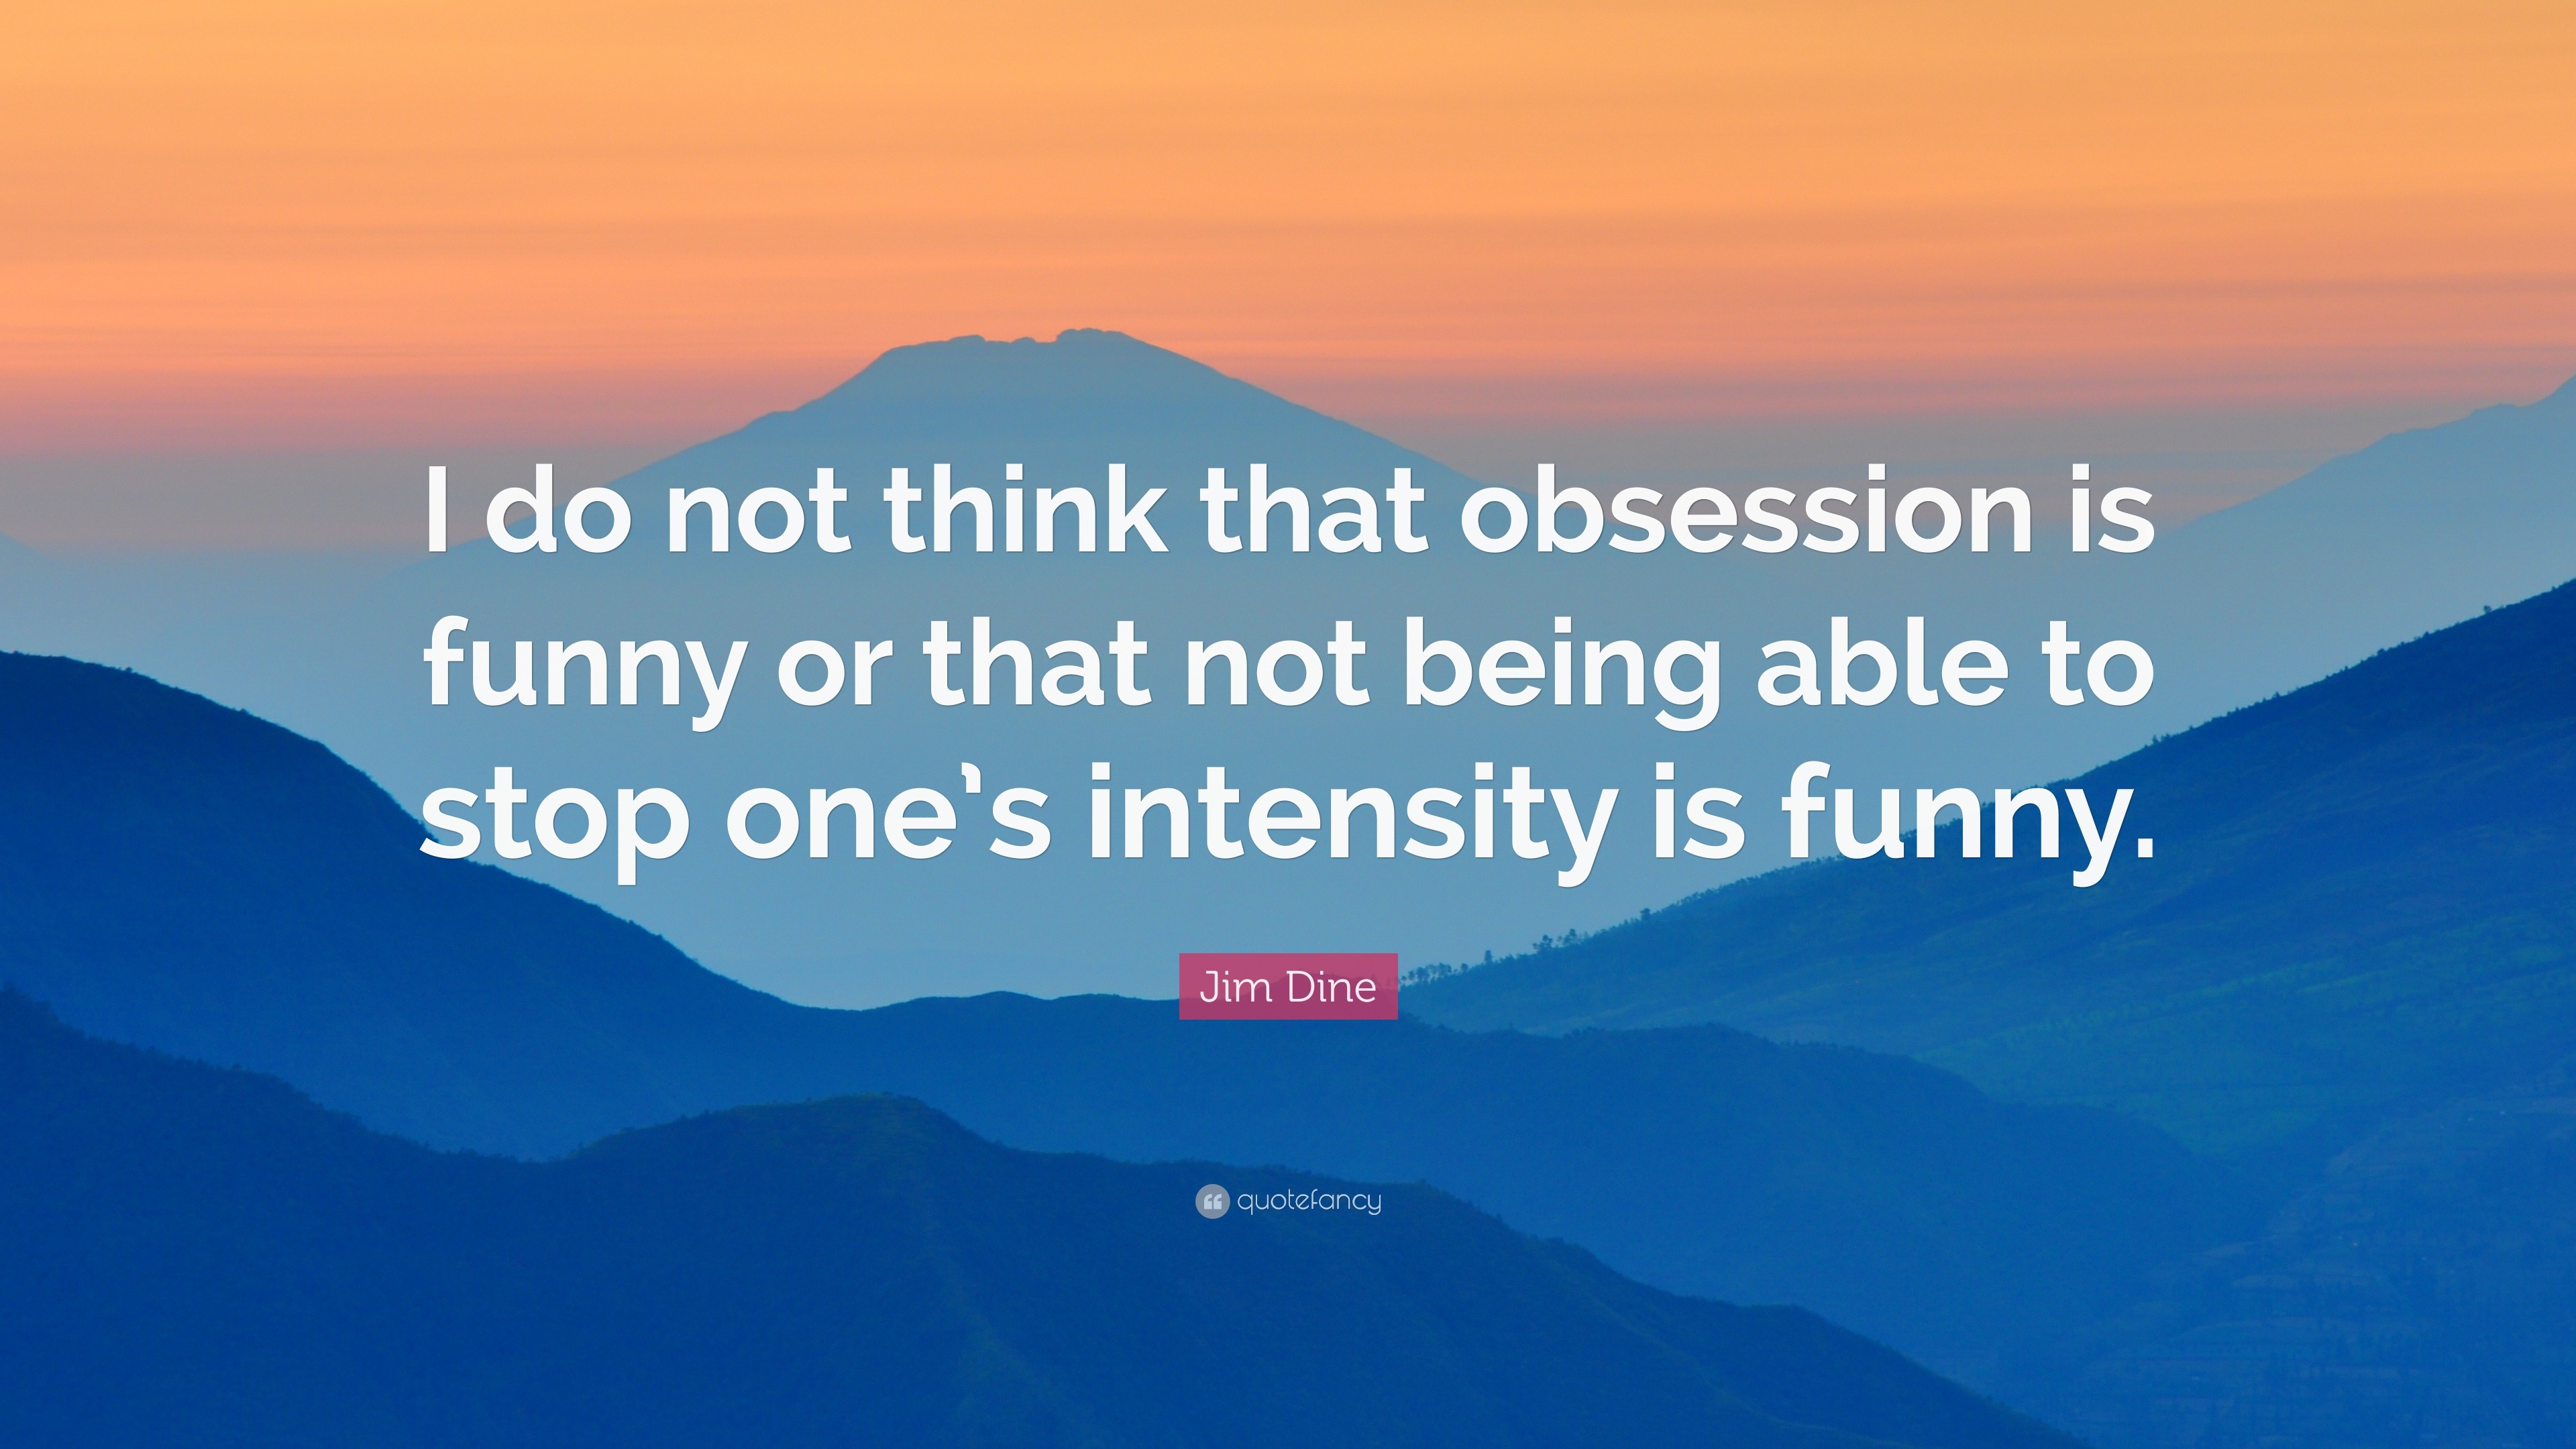 Jim Dine Quote: “I do not think that obsession is funny or that not being  able